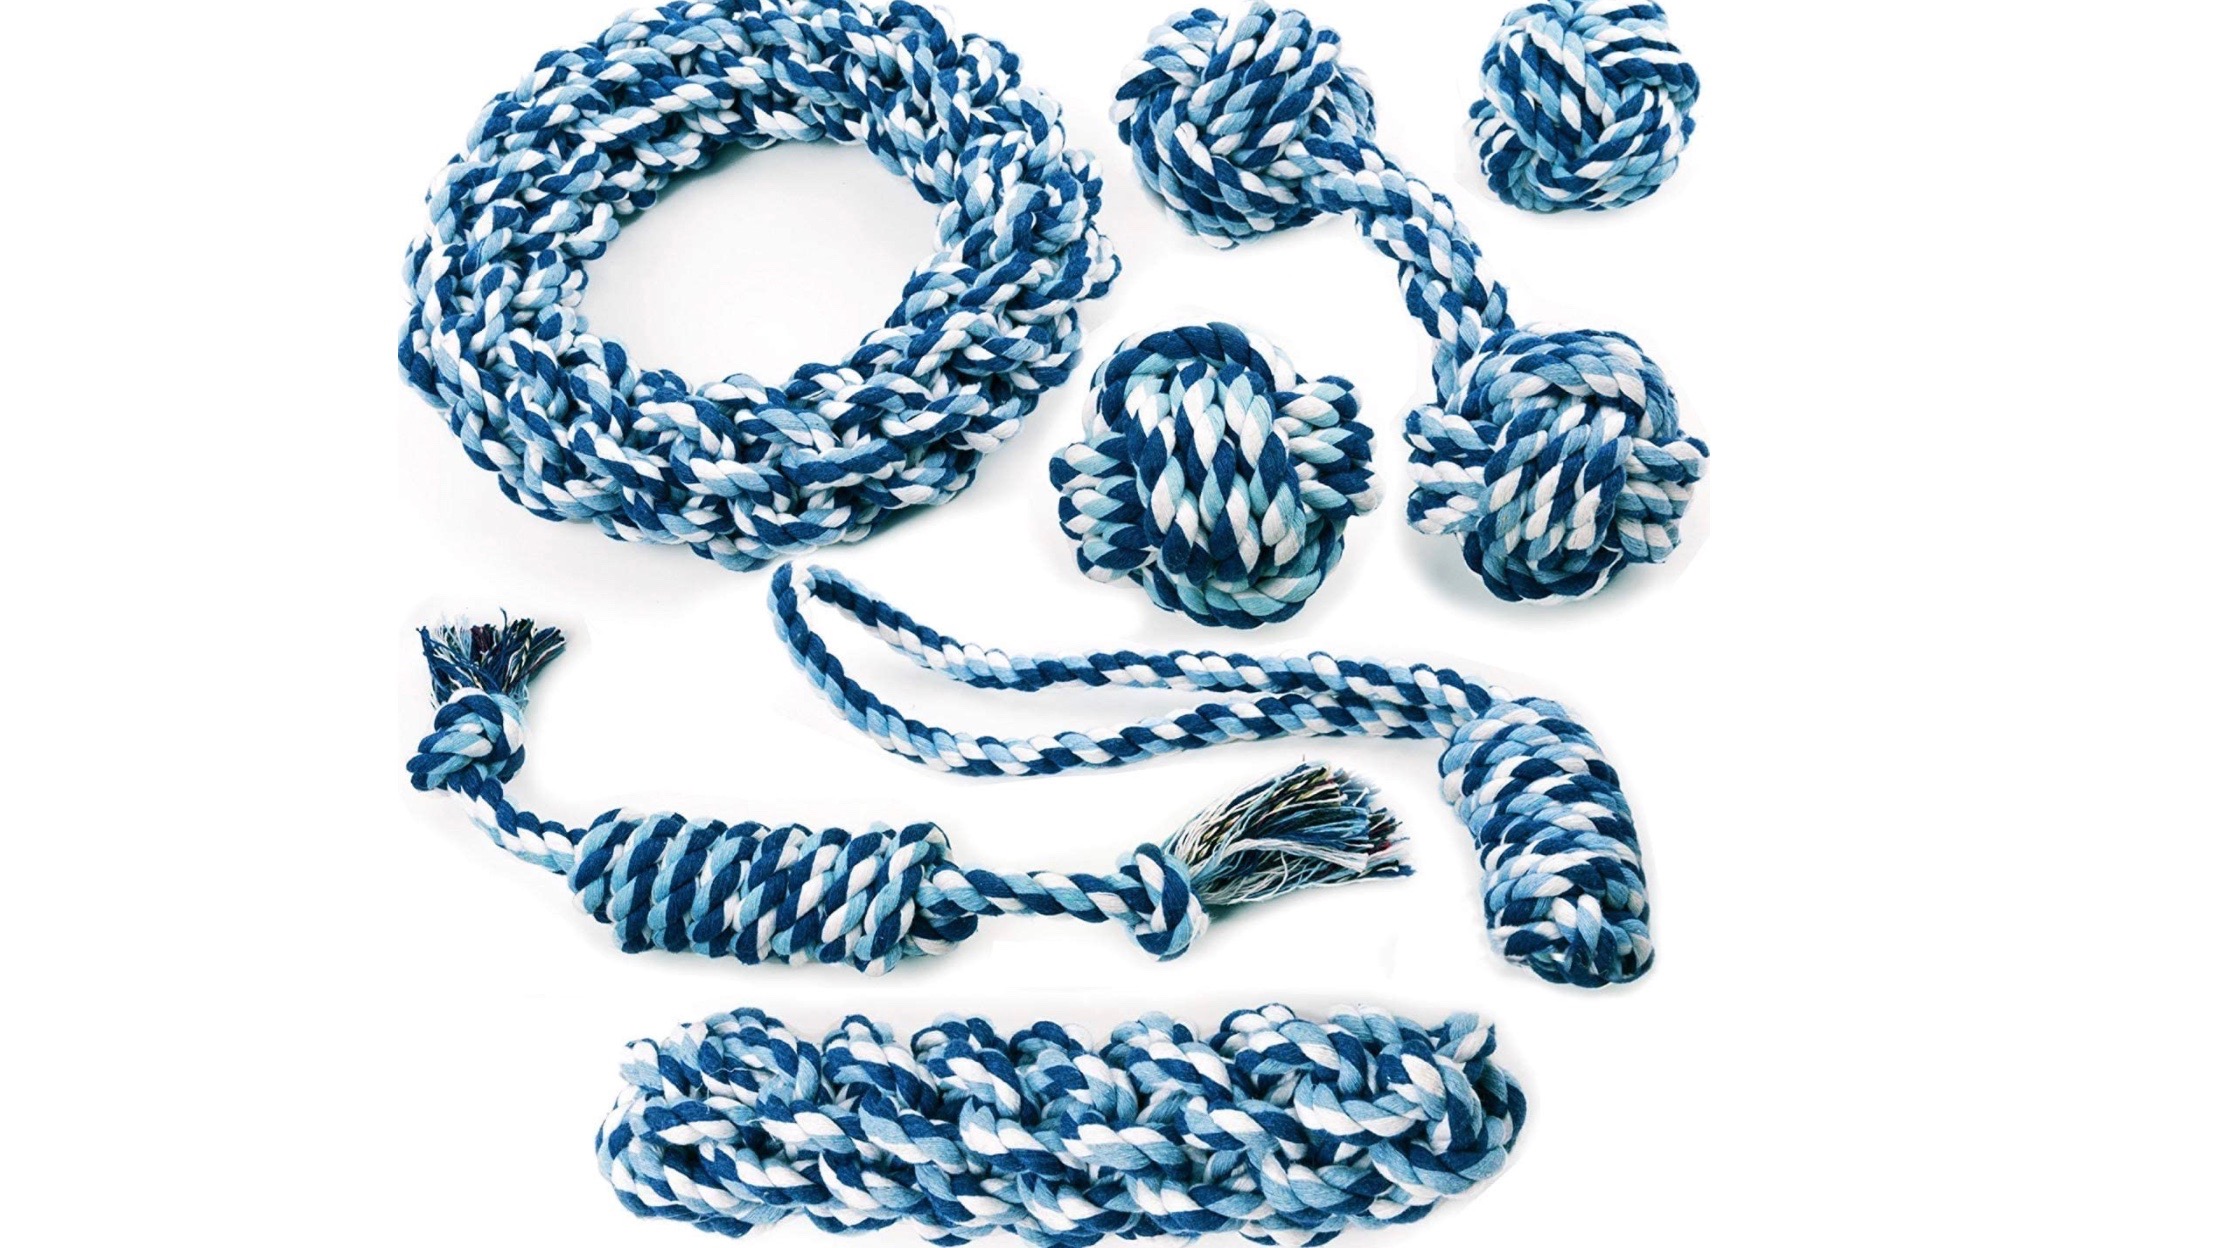 Rope Toy Assortment by Forever Friends